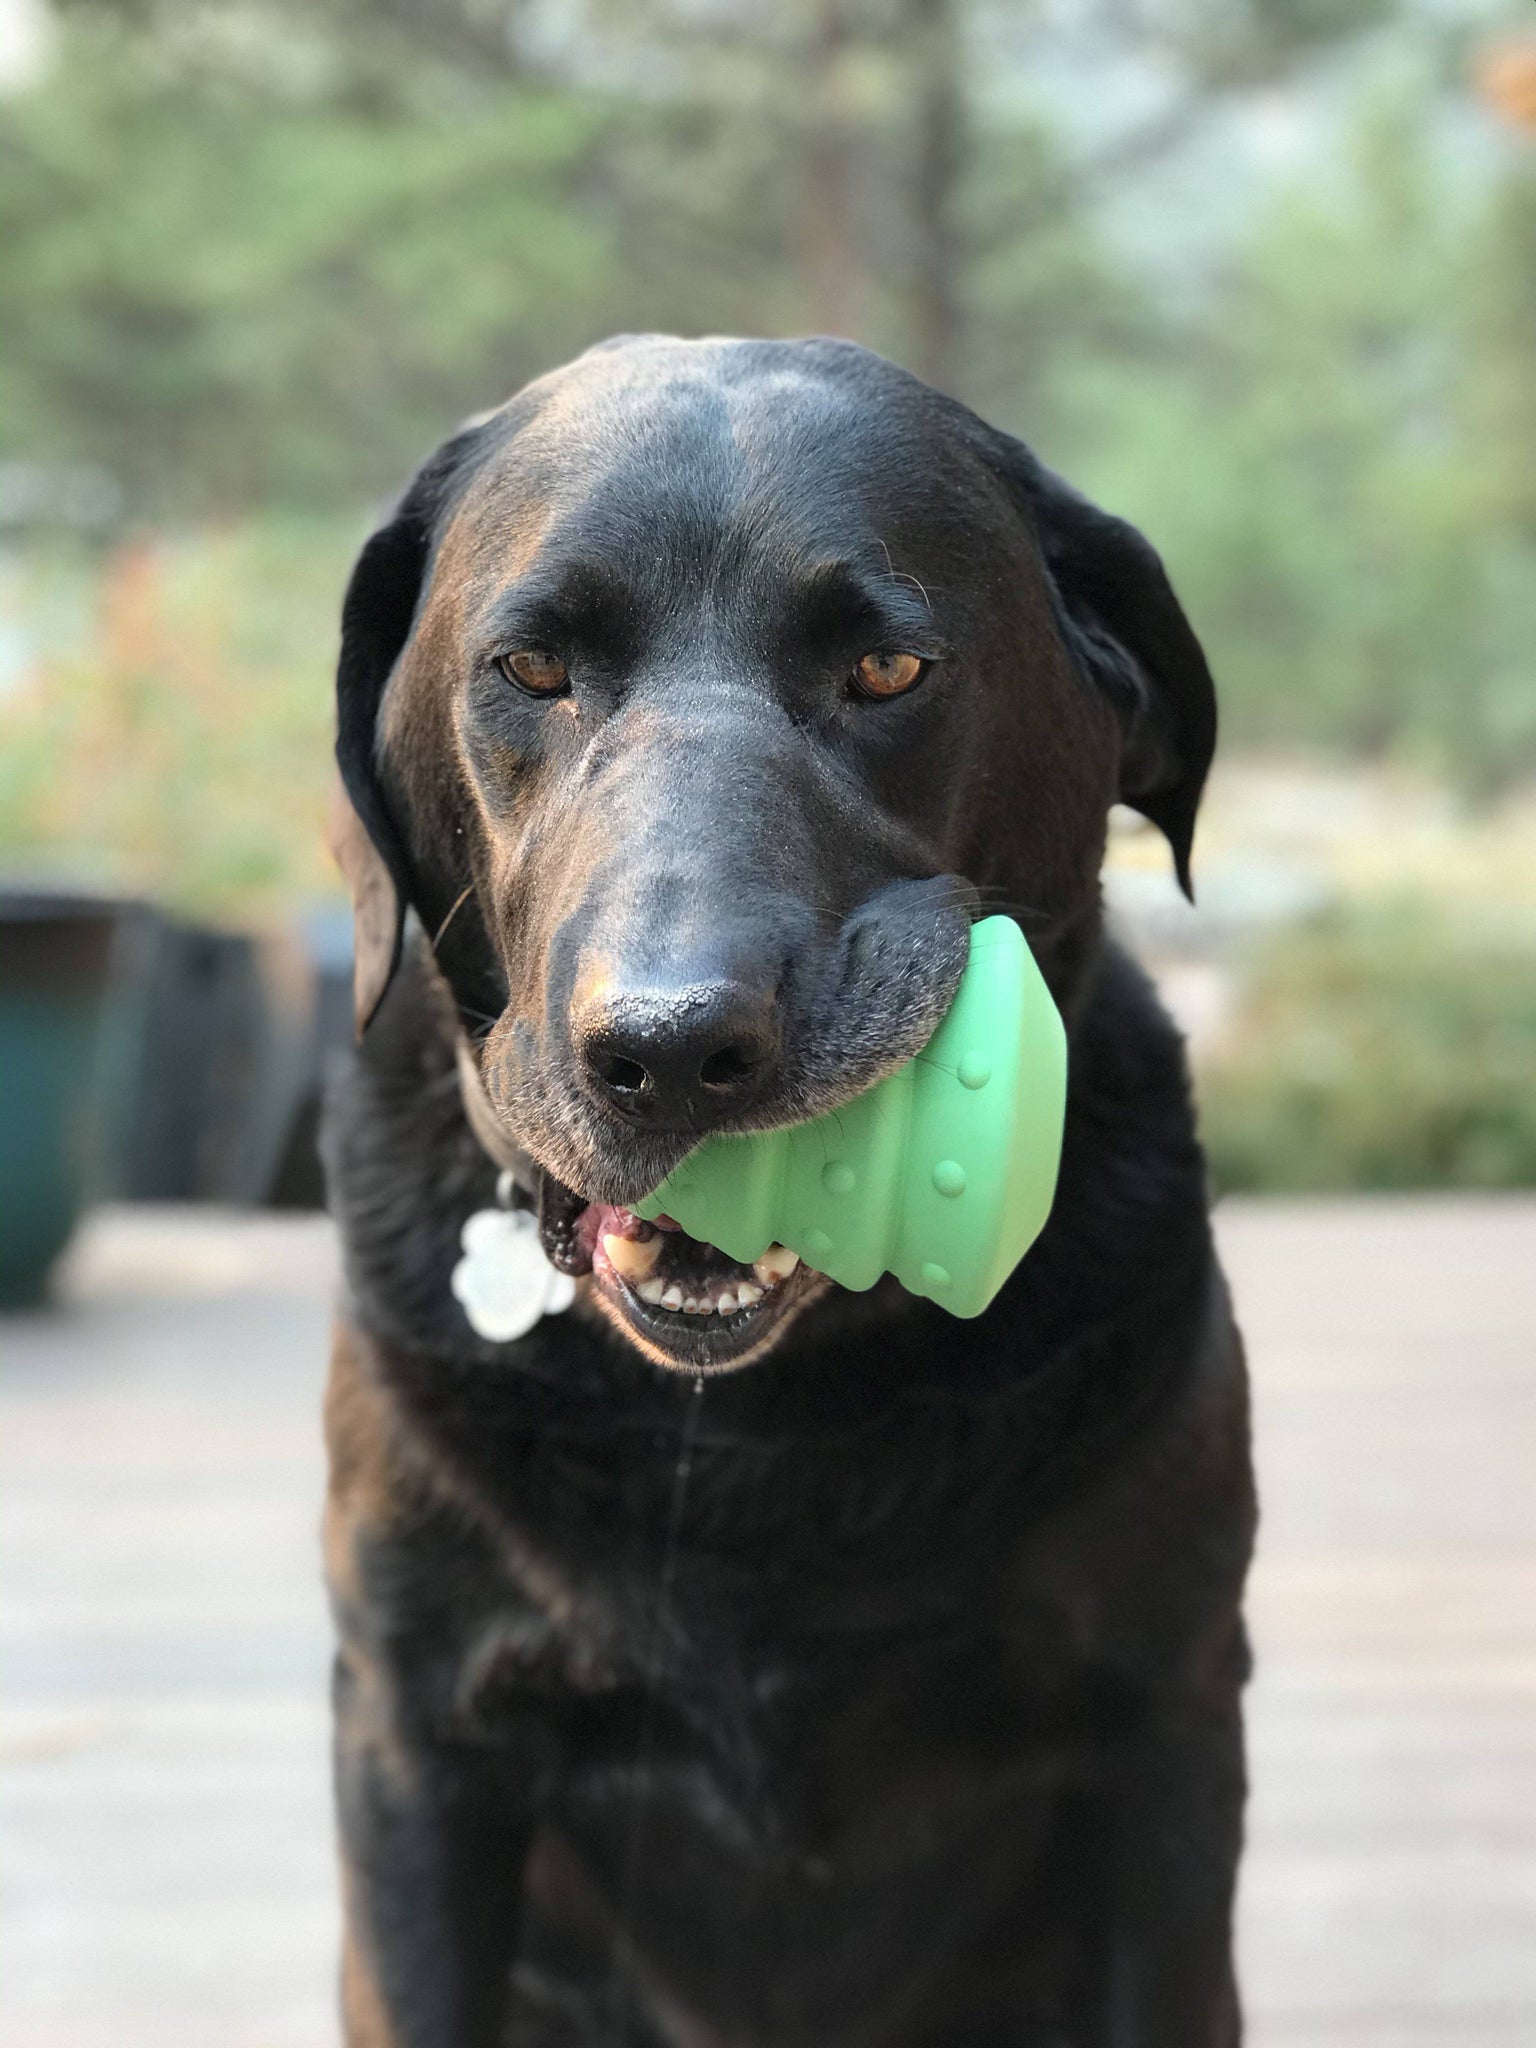 33 Best Dog Toys (1,000 + Tested And Reviewed By Real Dogs!) - Dog Lab